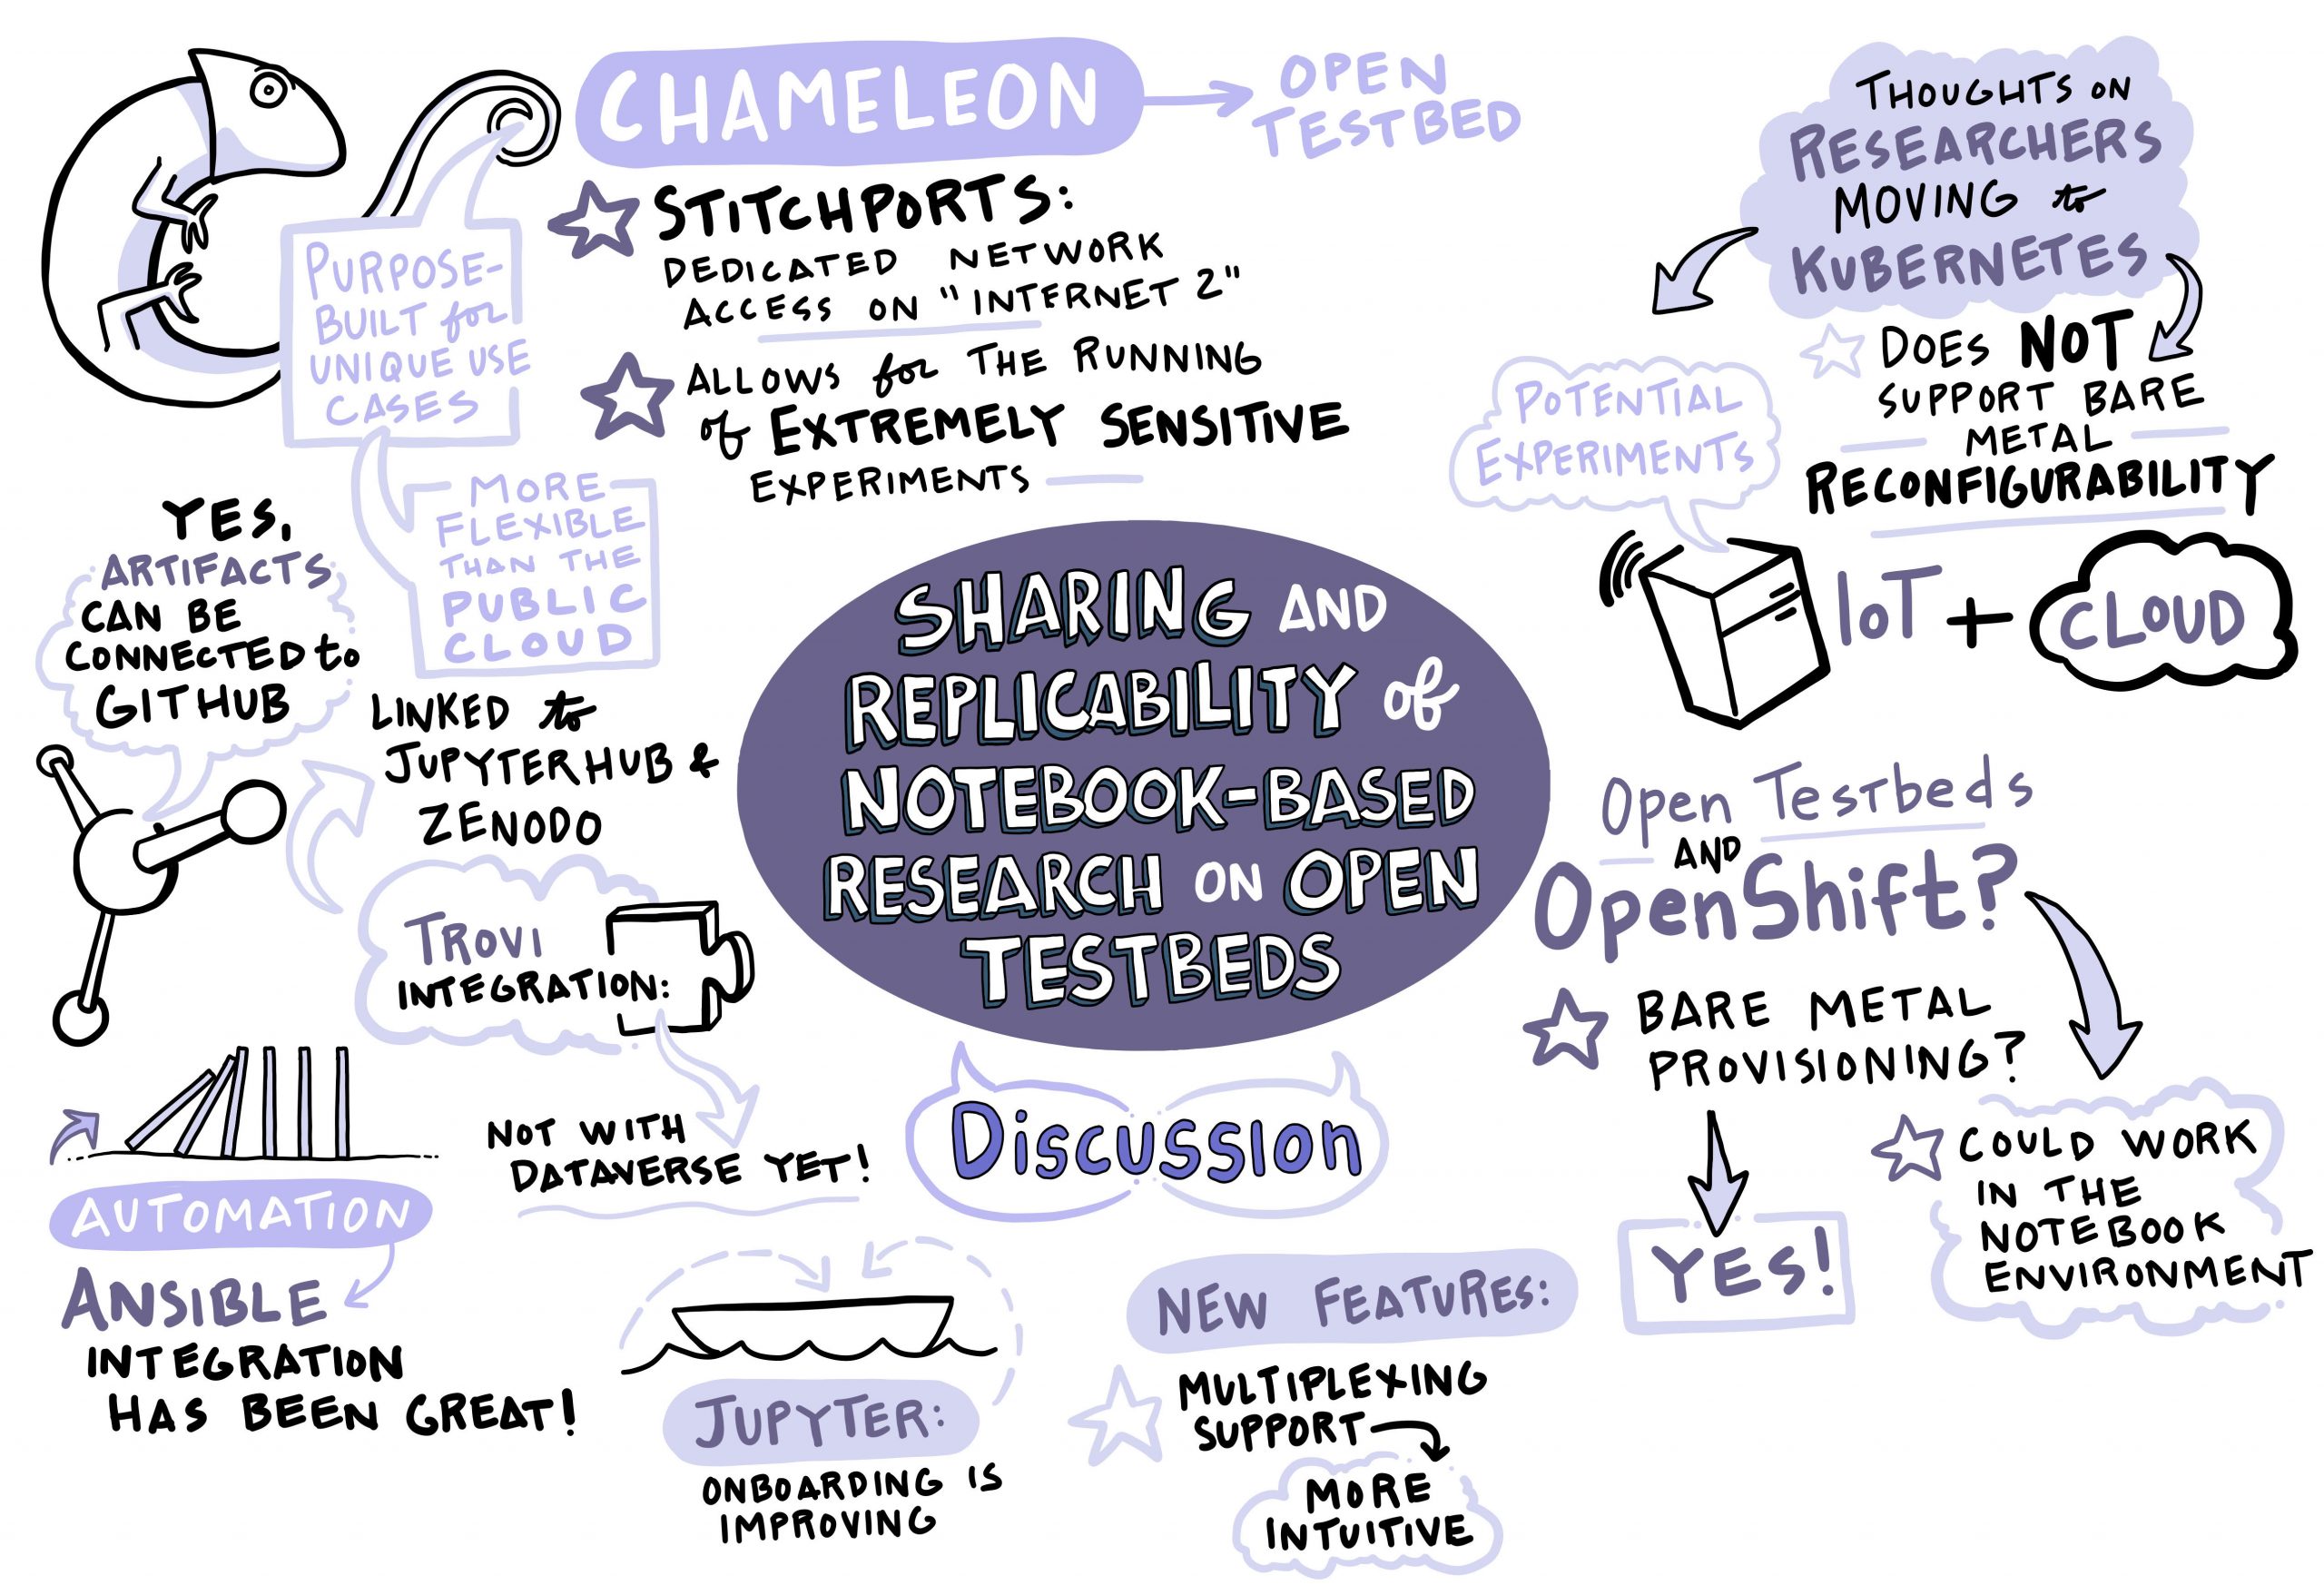 Digital Illustration from Roundtable: Sharing and Replicability of Notebook-Based Research on Open Testbeds